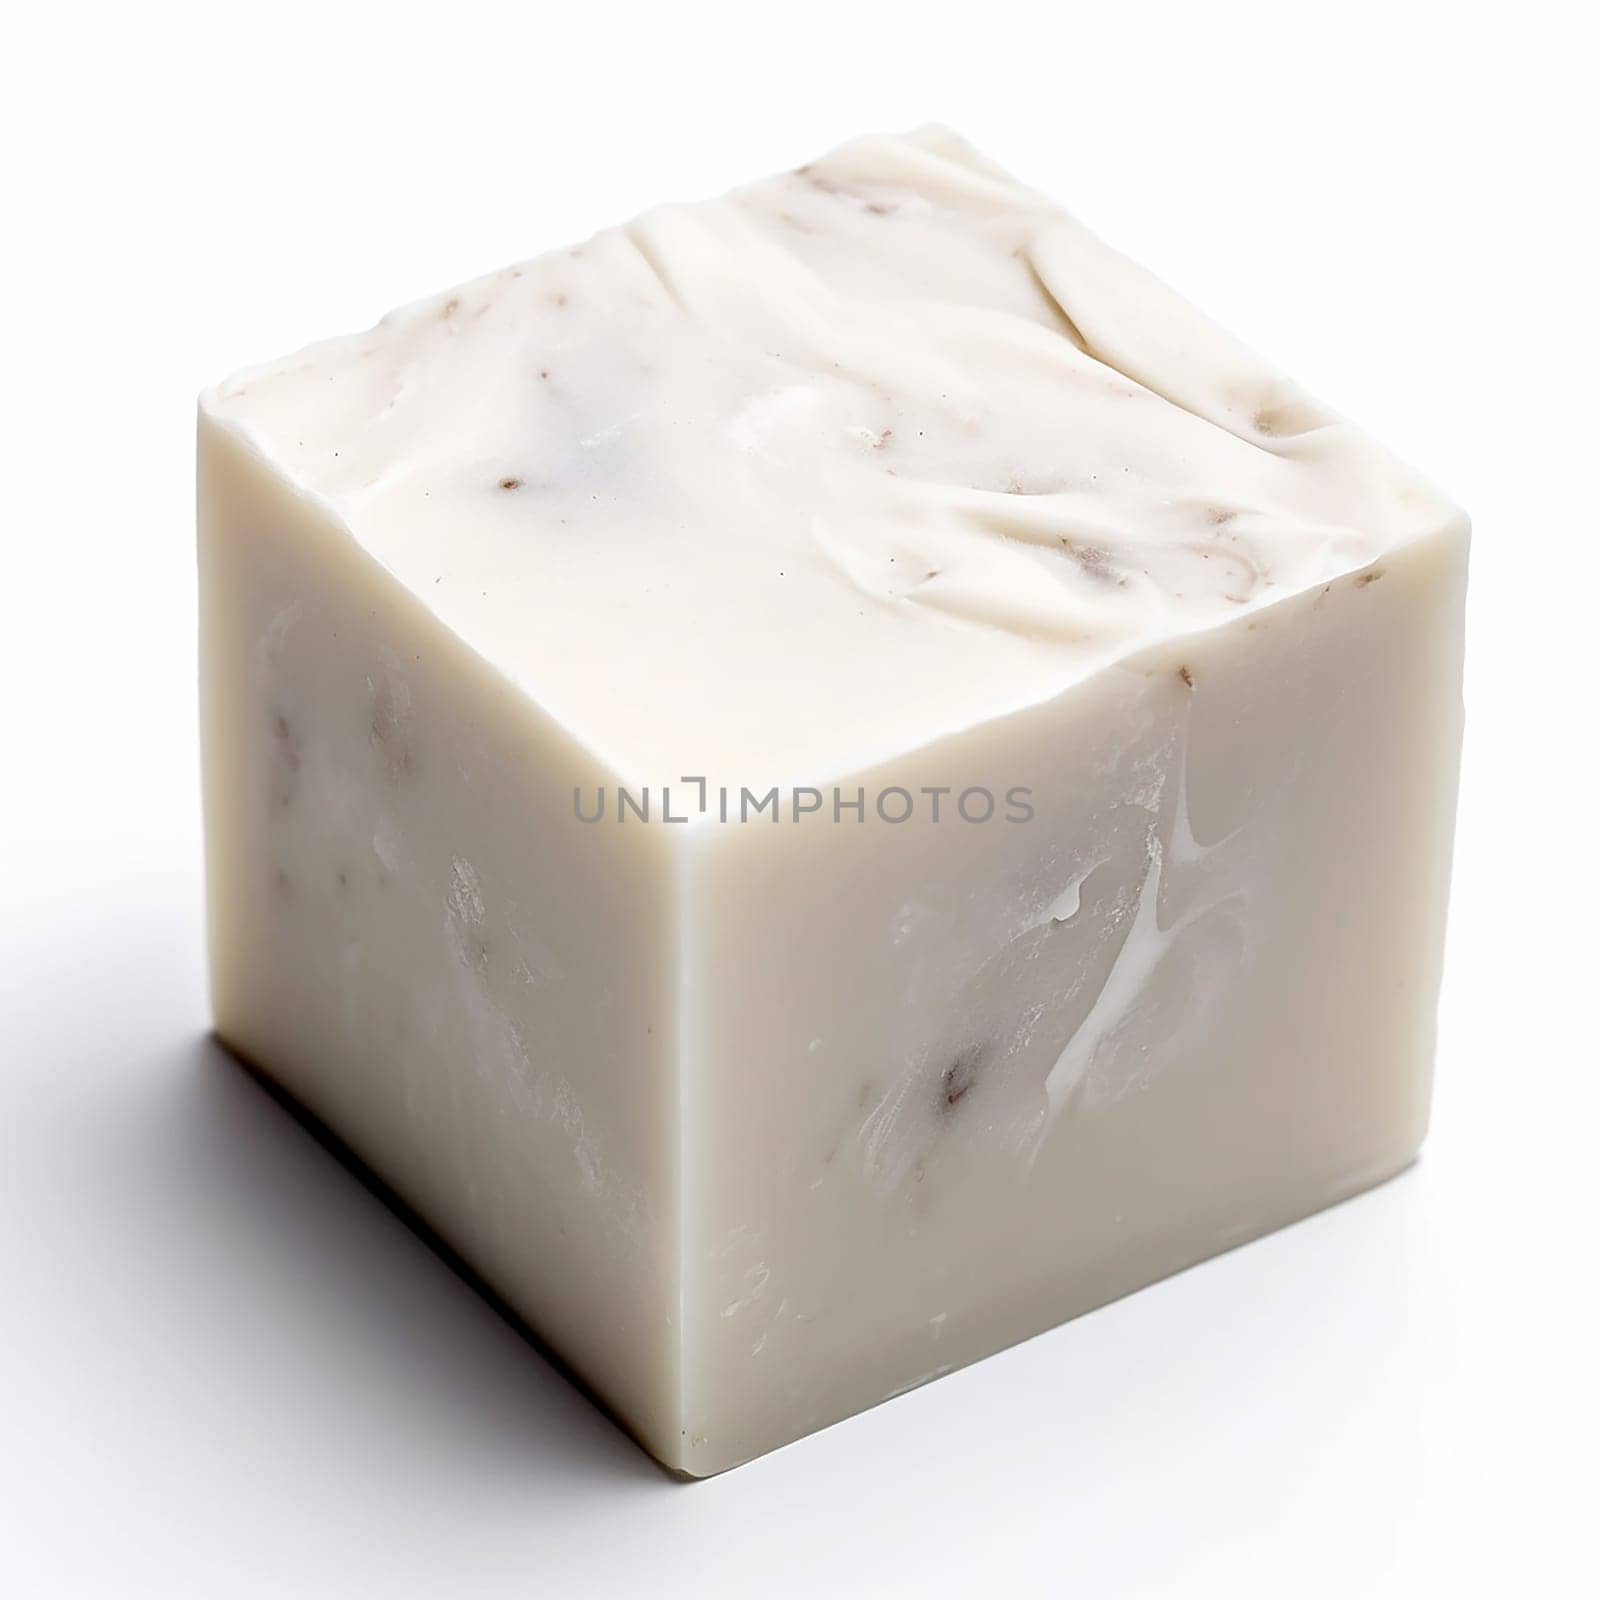 A single white marbled soap bar on a plain background.